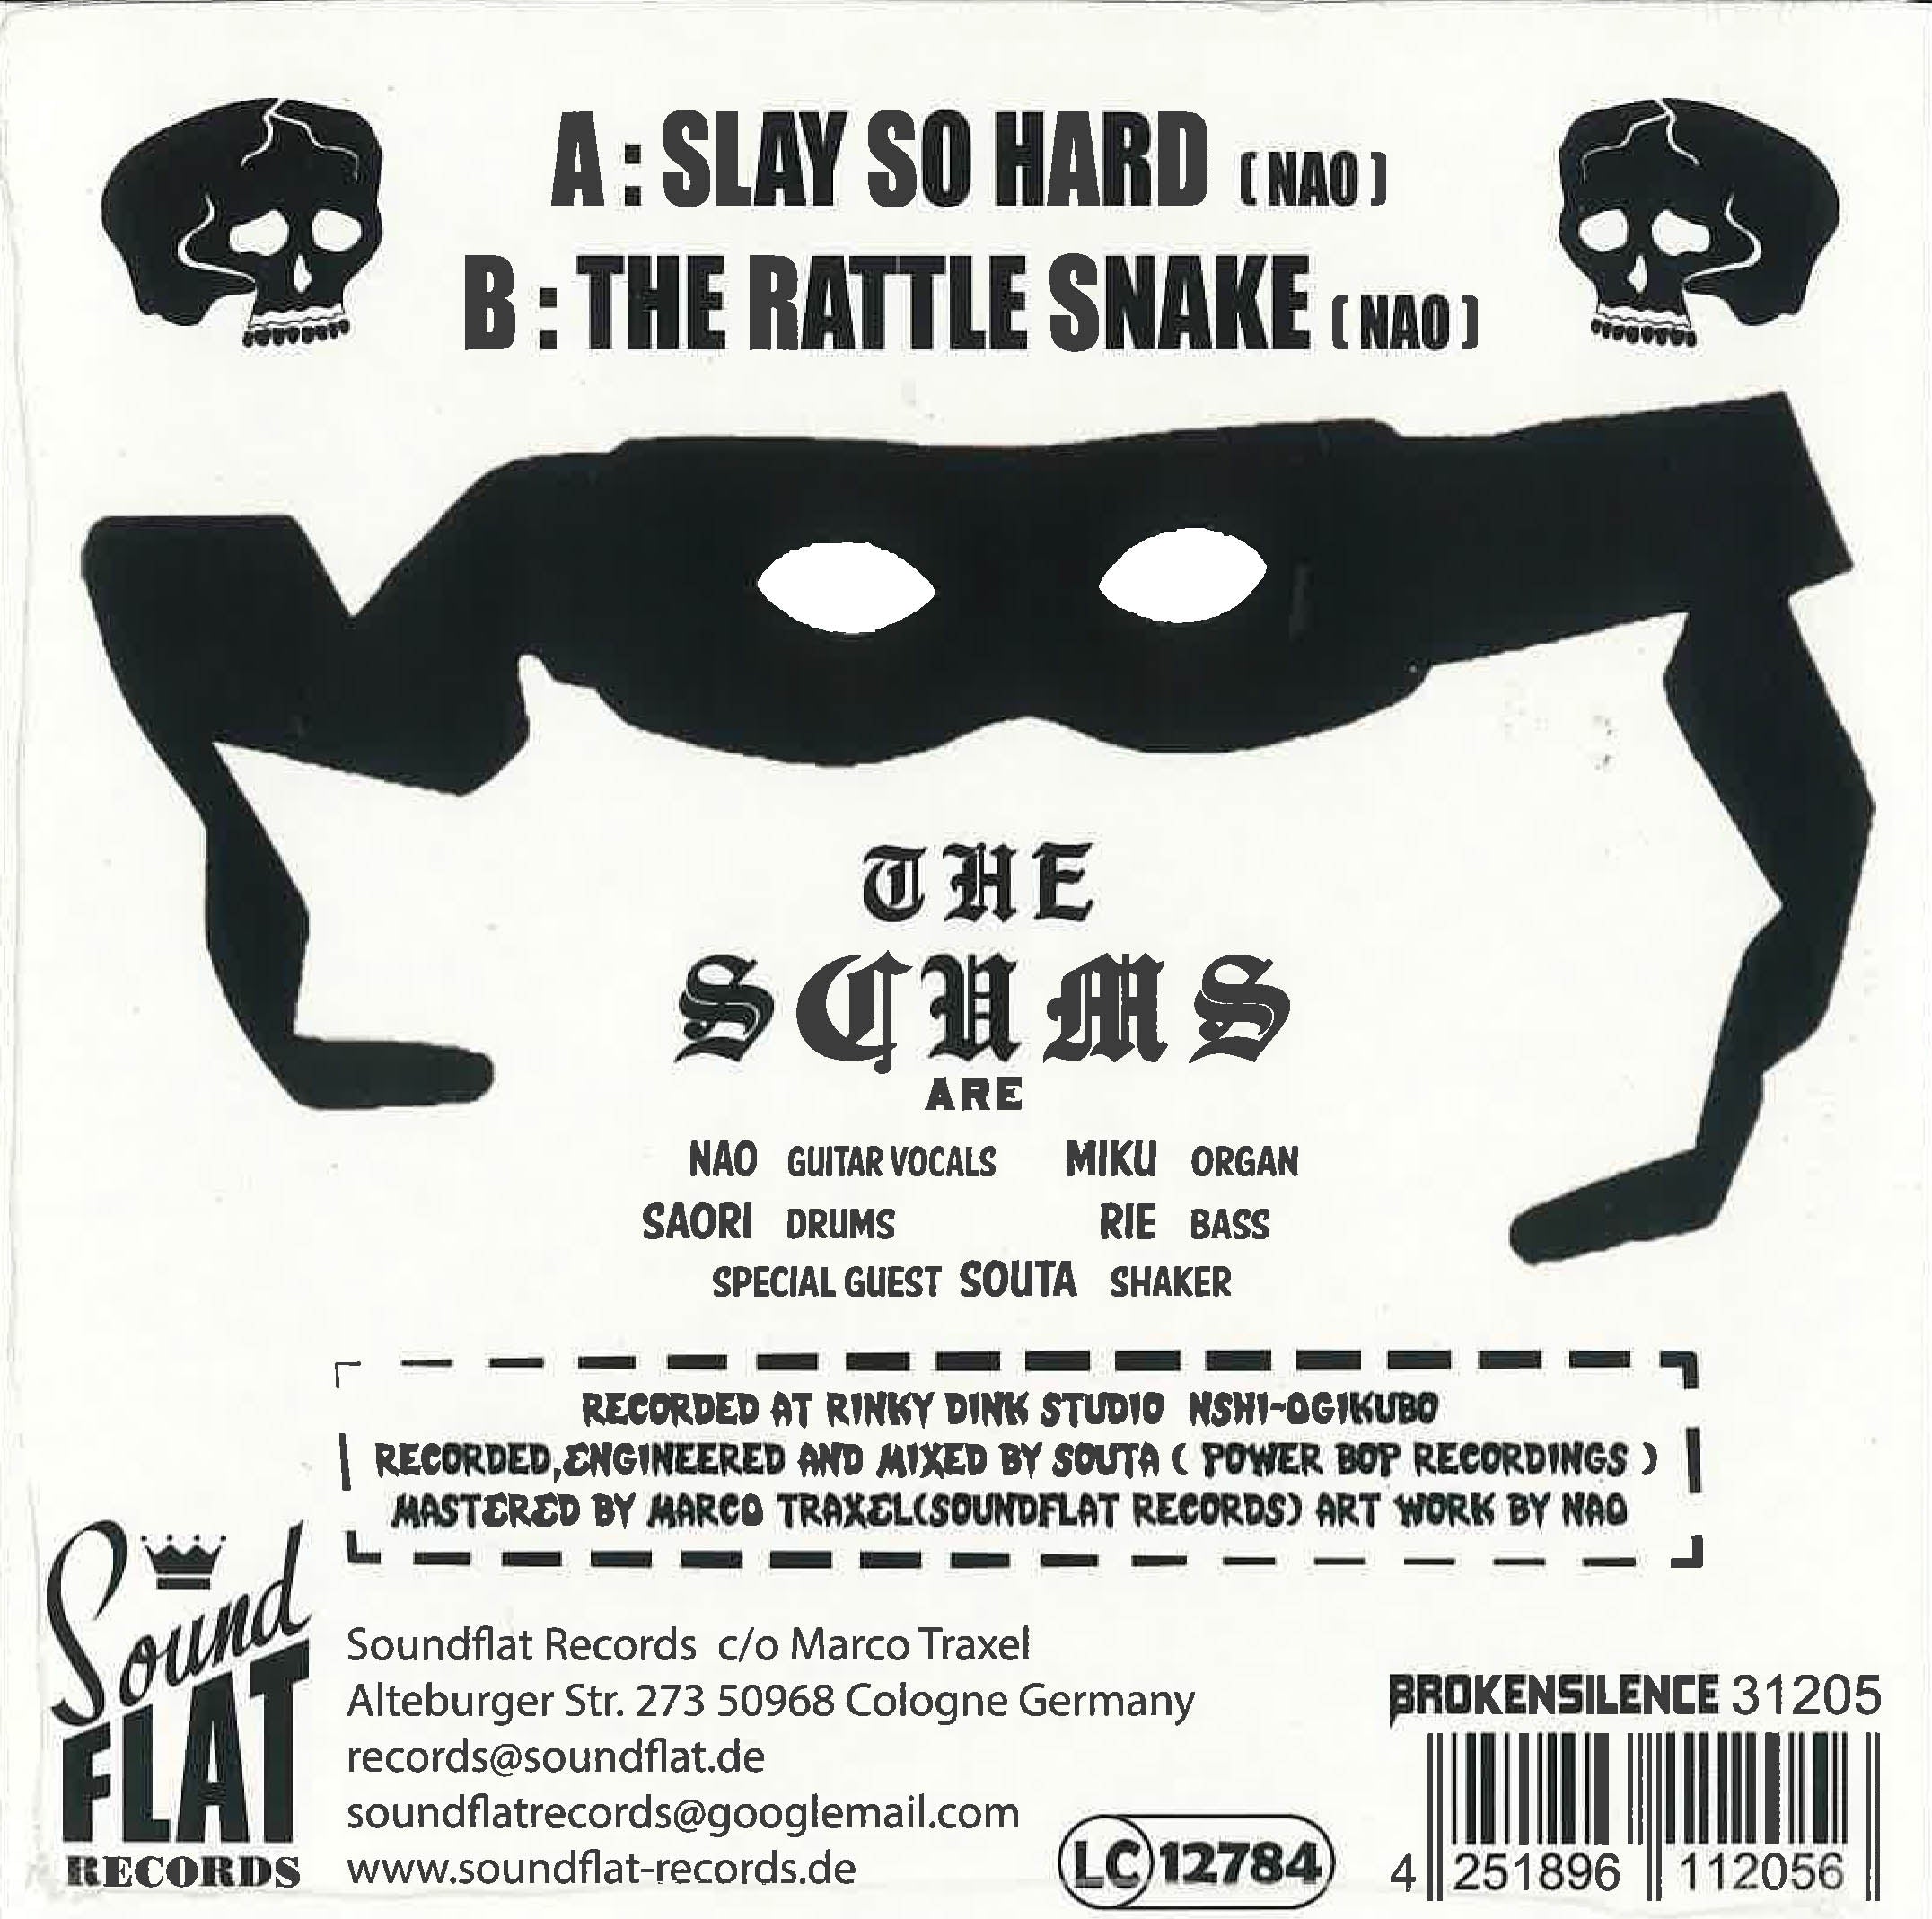 SCUMS, THE  (ザ・スカムズ)  - Slay So Hard / The Rattle Snake (German 「日本国内流通分500枚限定」ジャケ付き 7"/New ) ※日本全国送料¥300にて発送可！